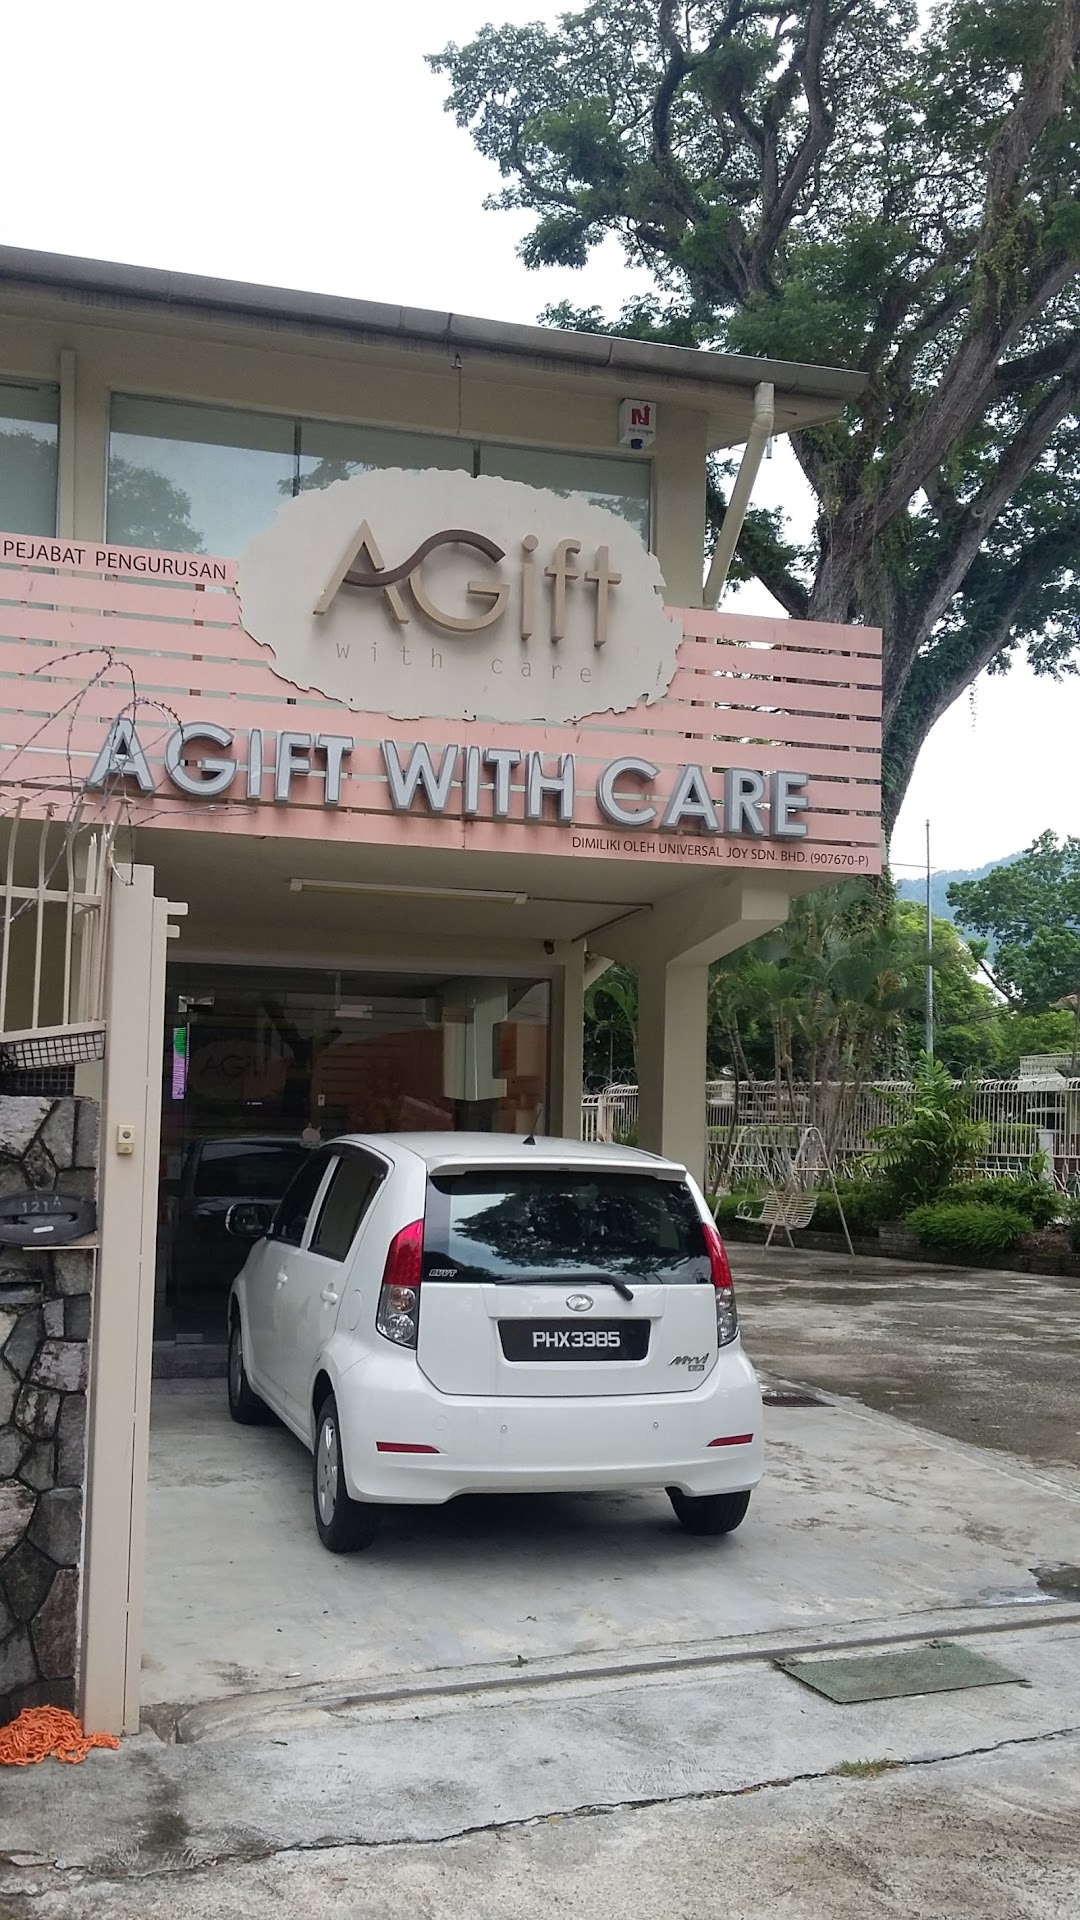 AGift With Care - Head Office